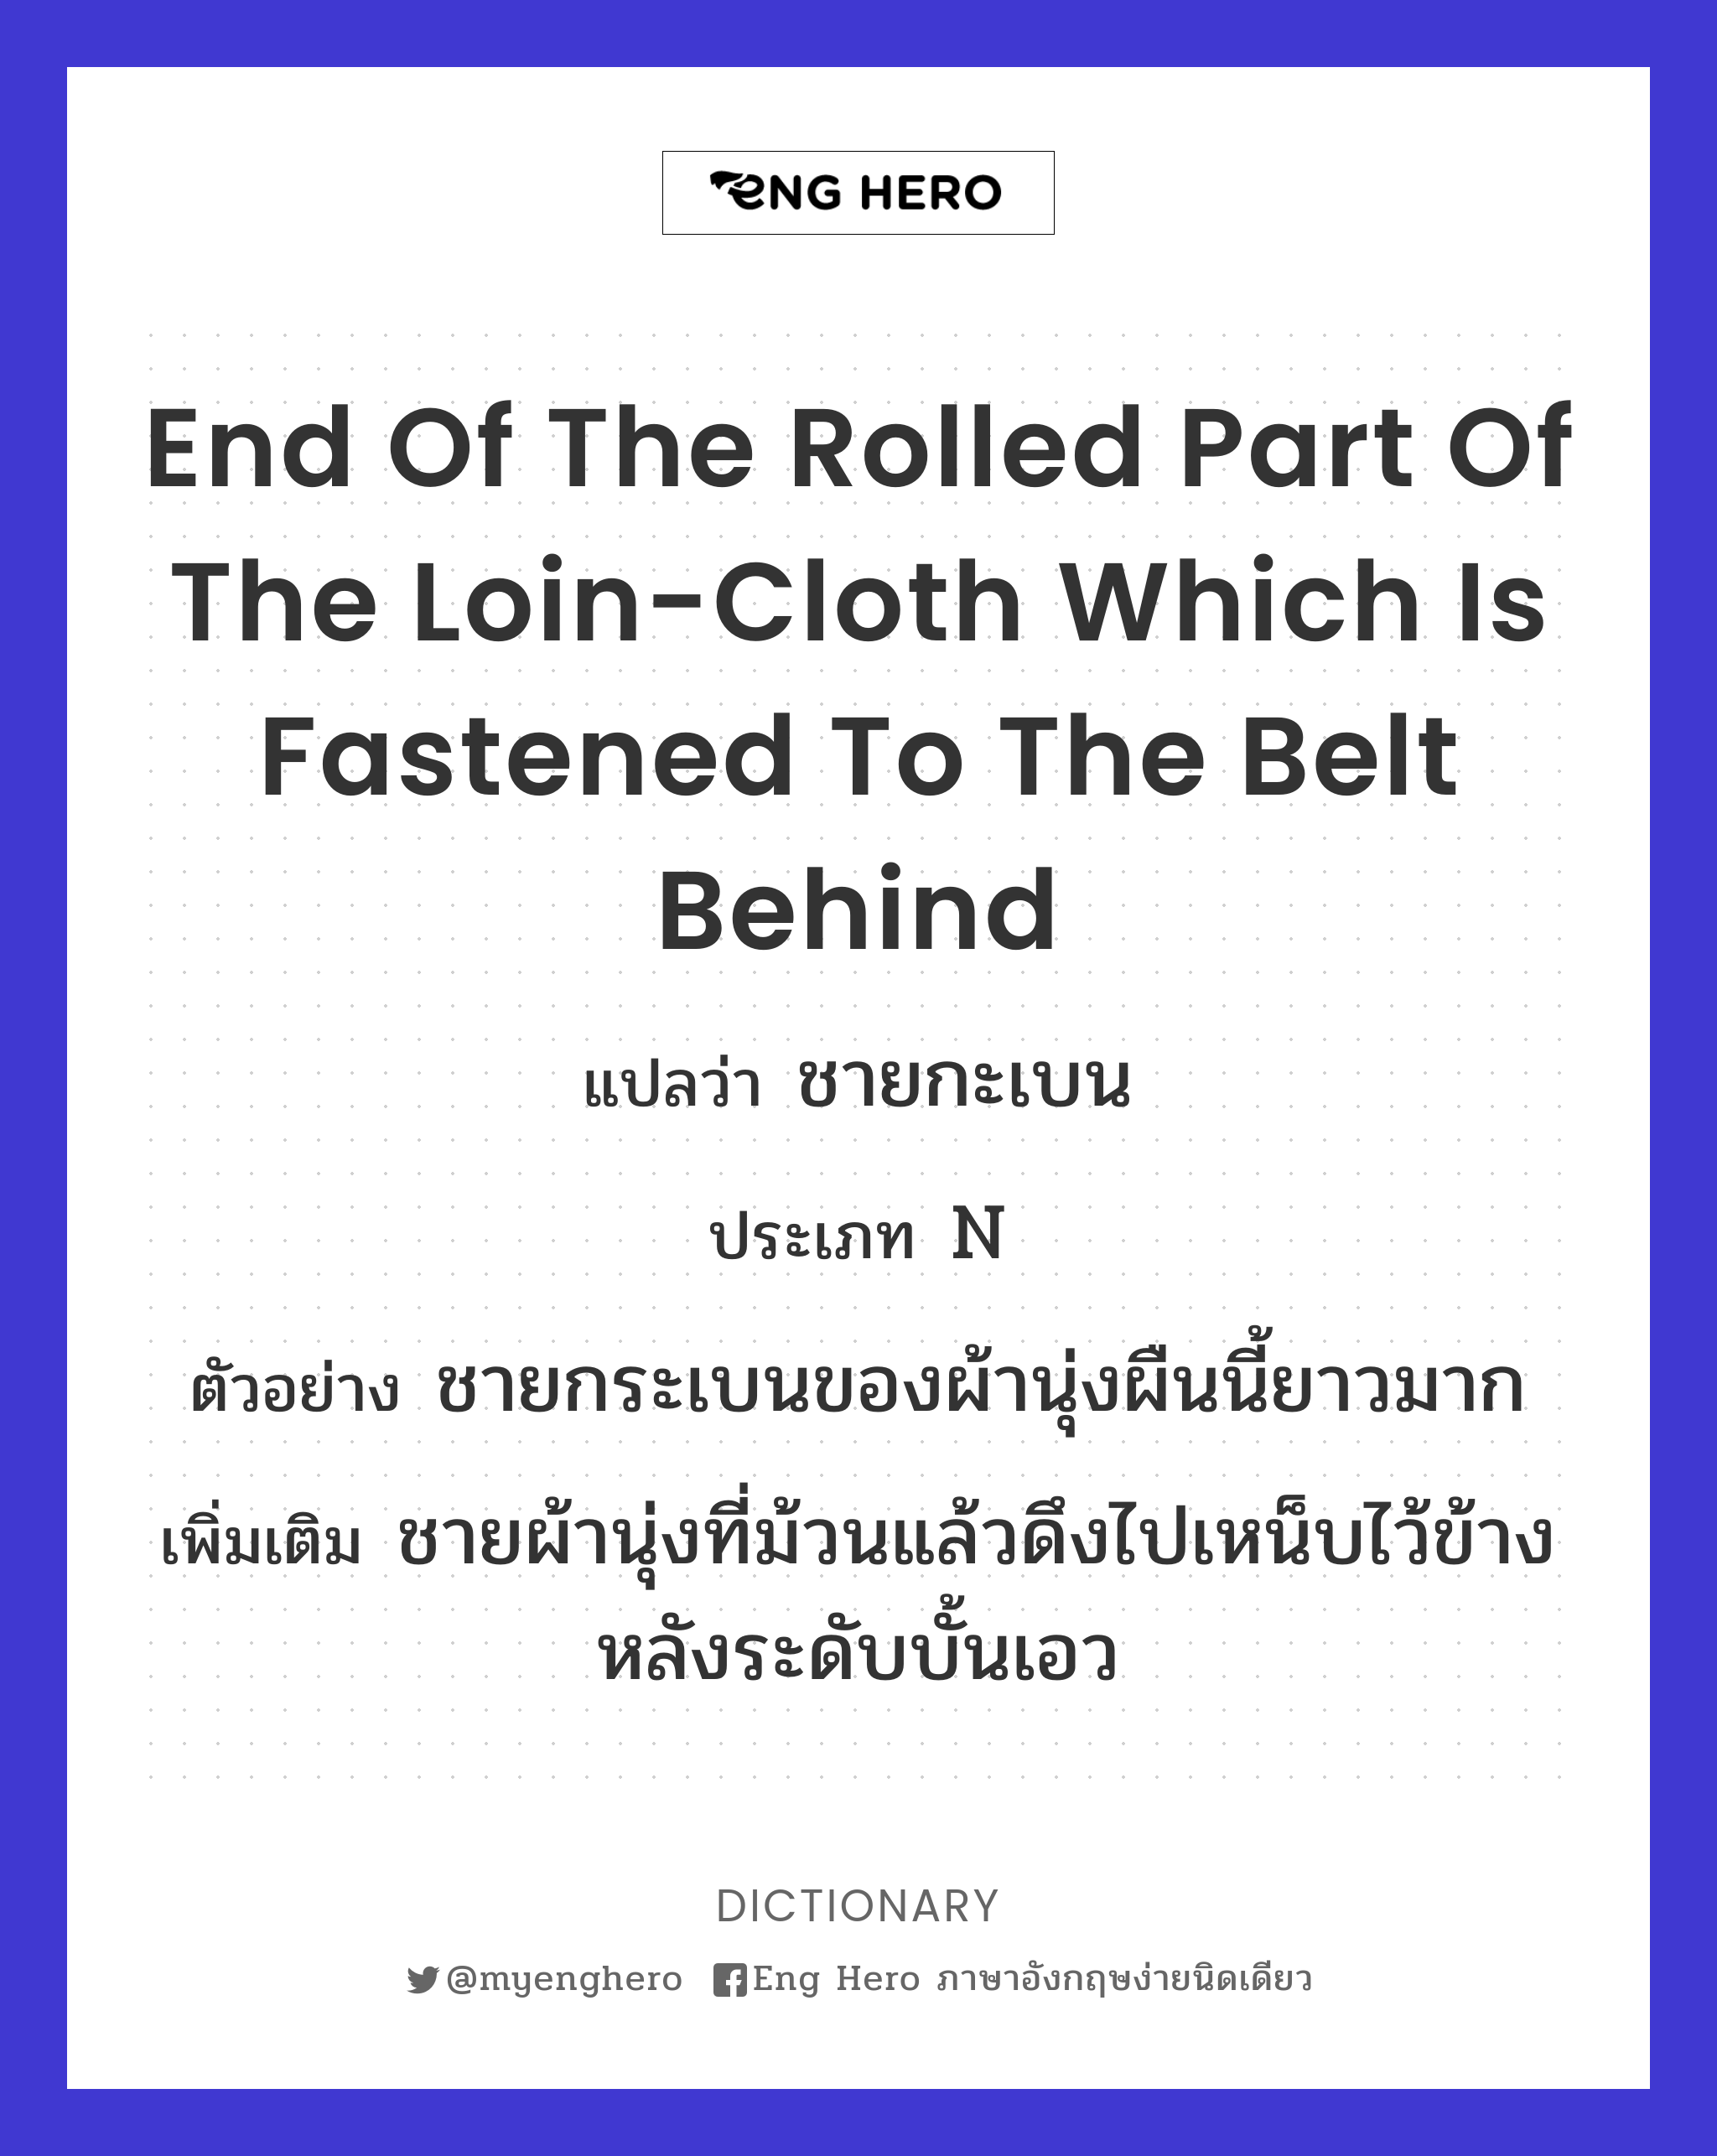 end of the rolled part of the loin-cloth which is fastened to the belt behind